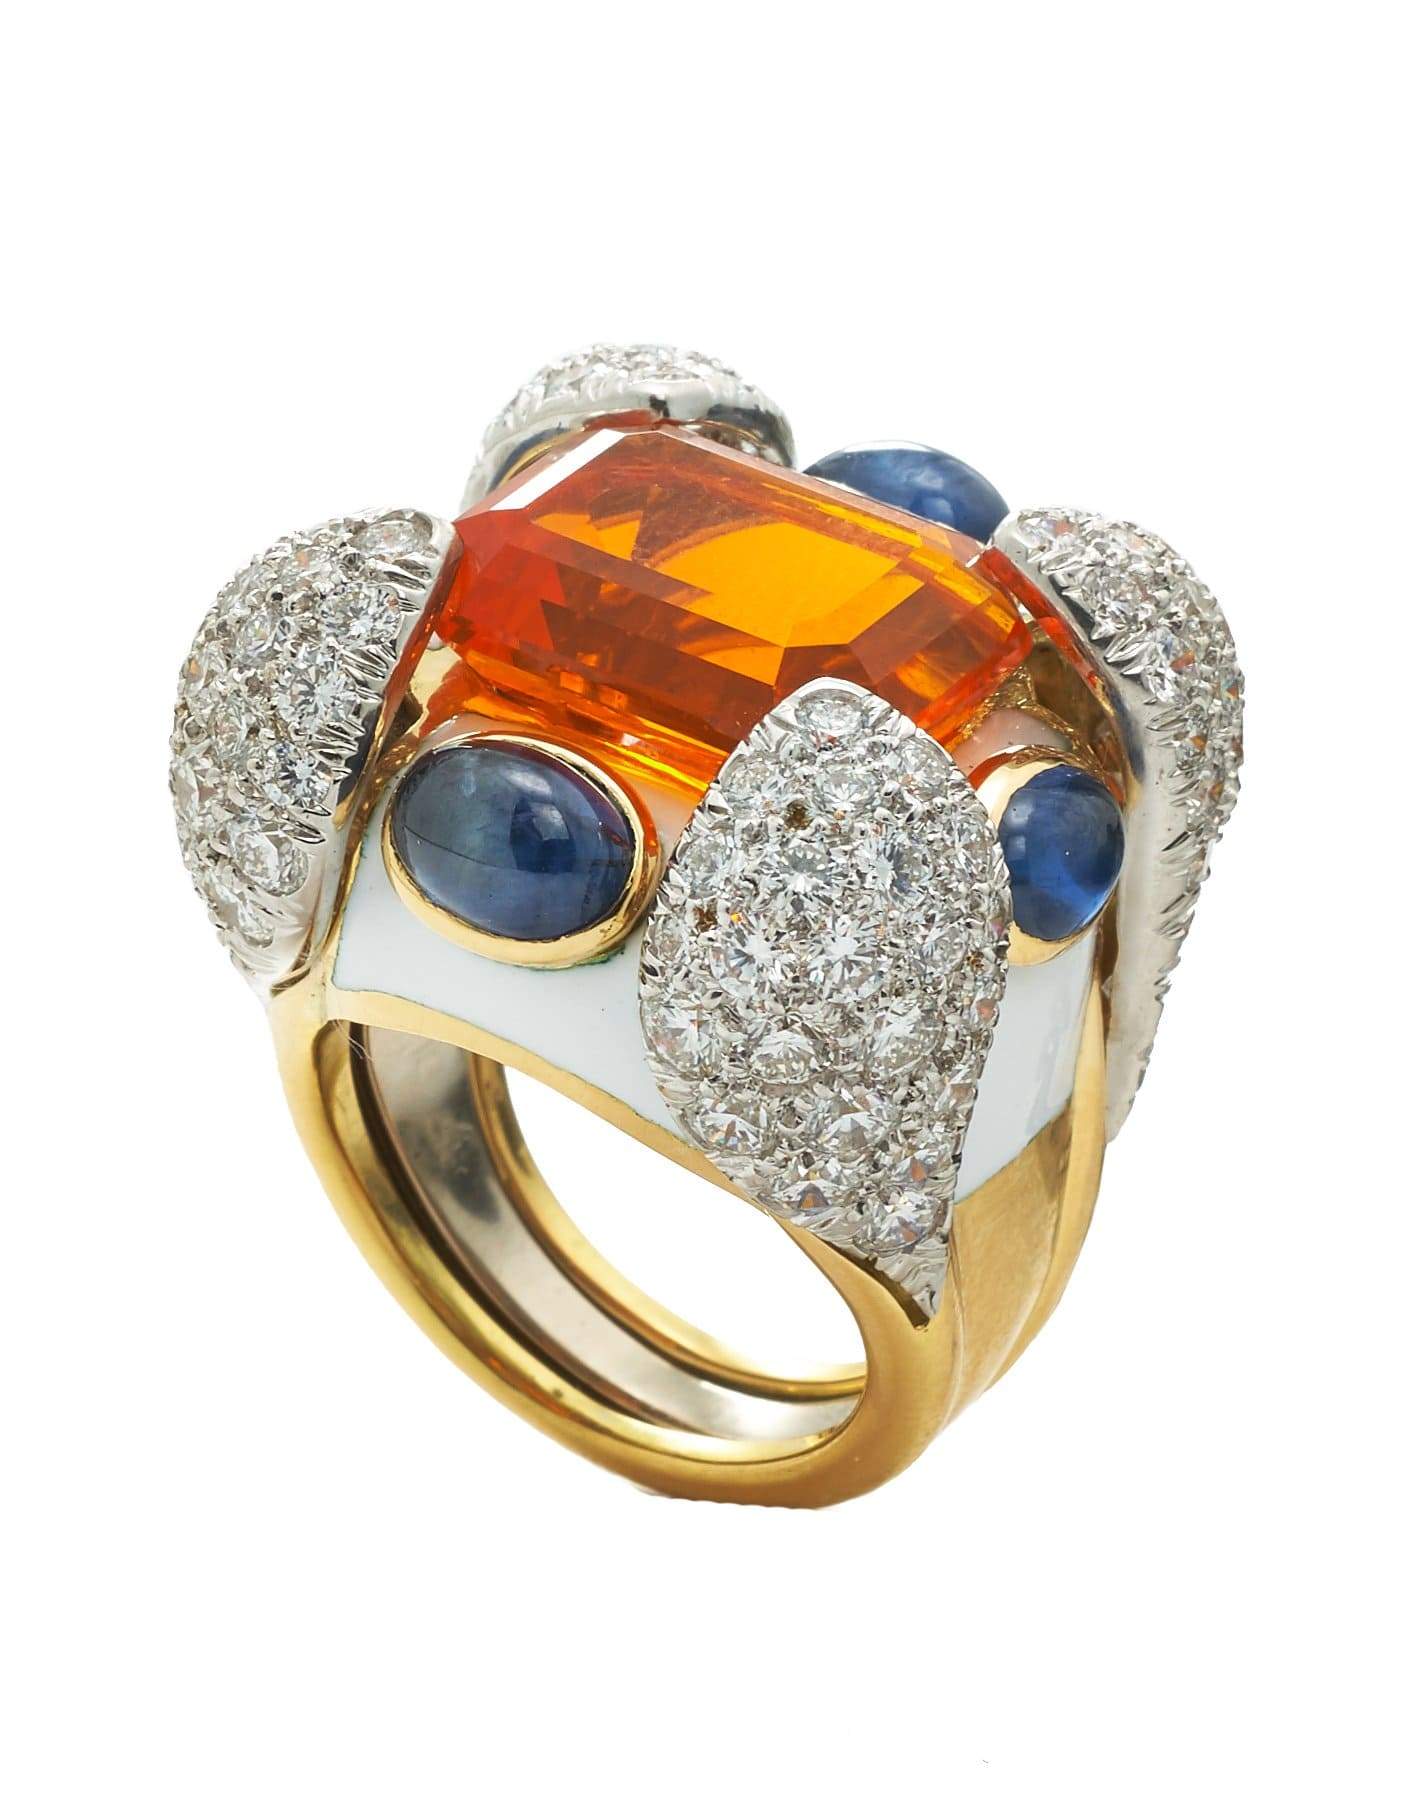 DAVID WEBB-Couture Fire Opal, Sapphire and Diamond Ring-YELLOW GOLD